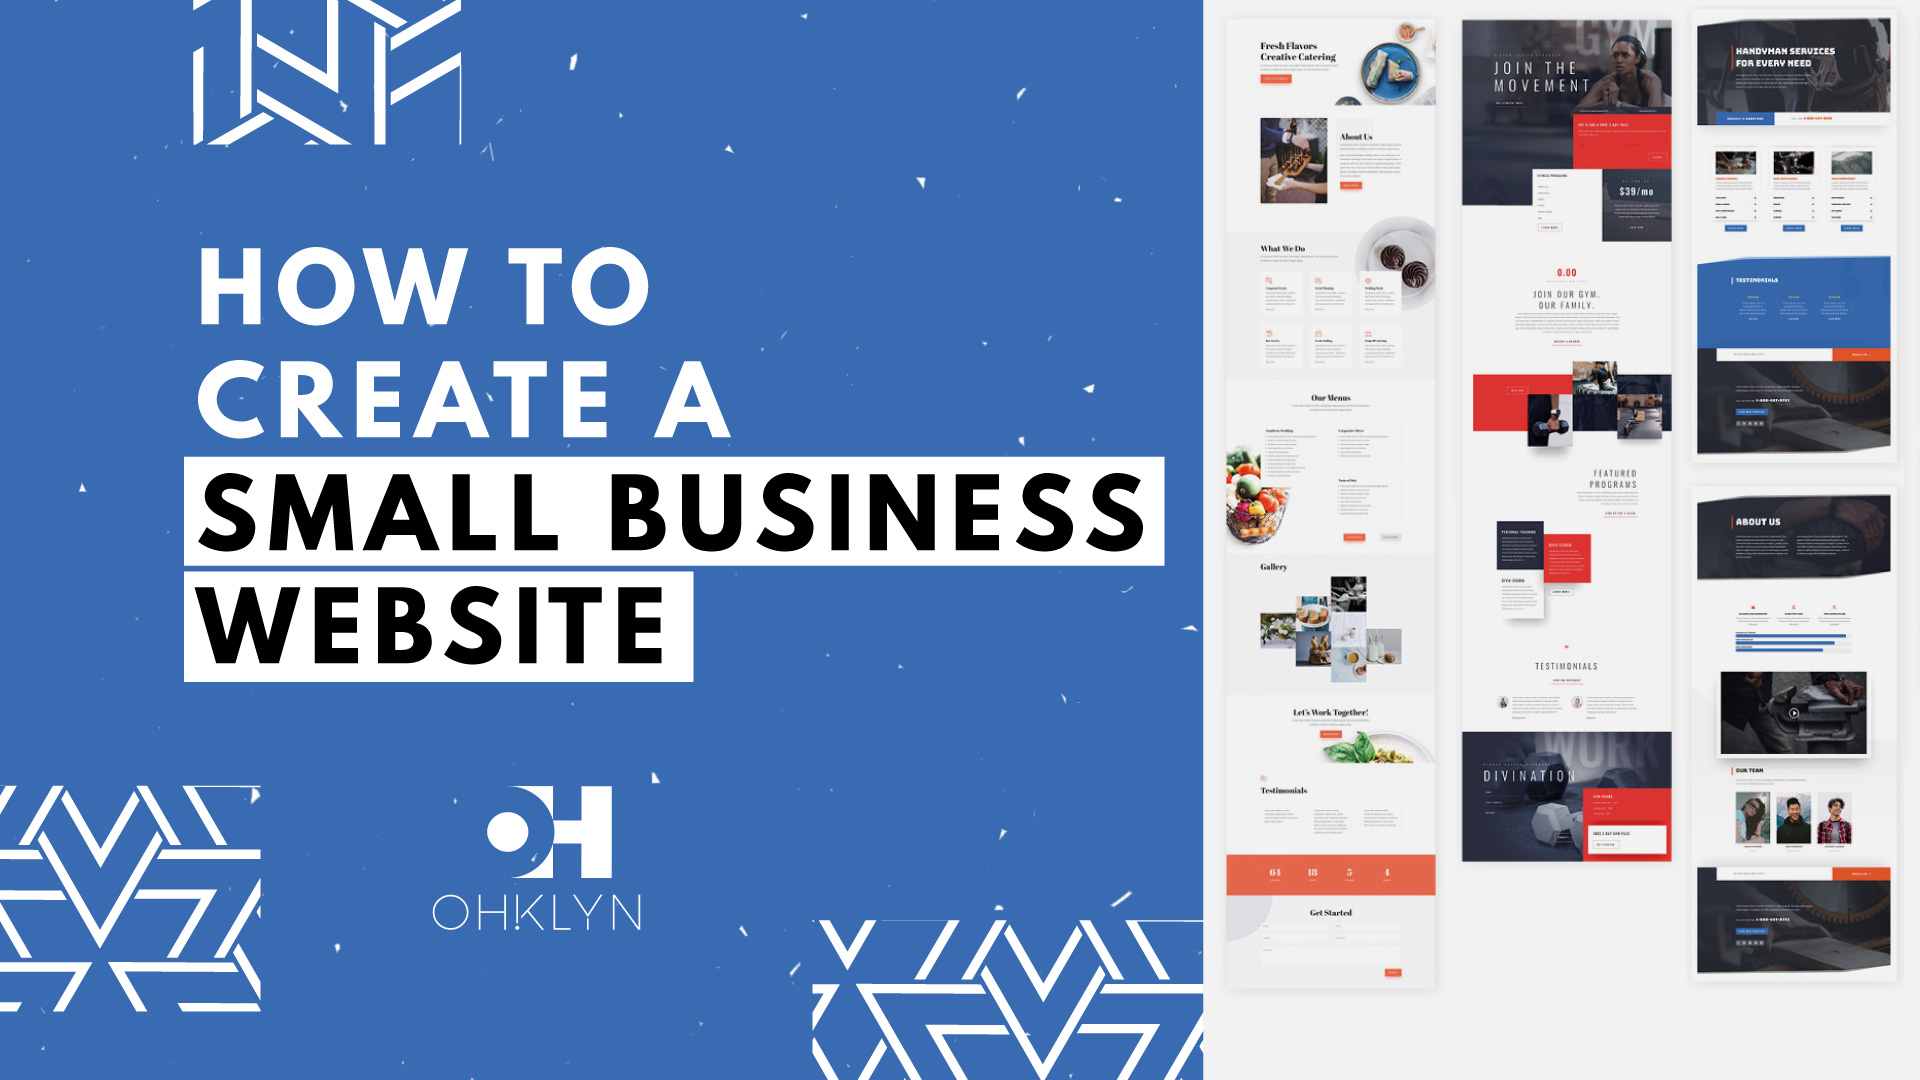 How to Create a Small Business Website | Free WordPress Tutorial (2019)